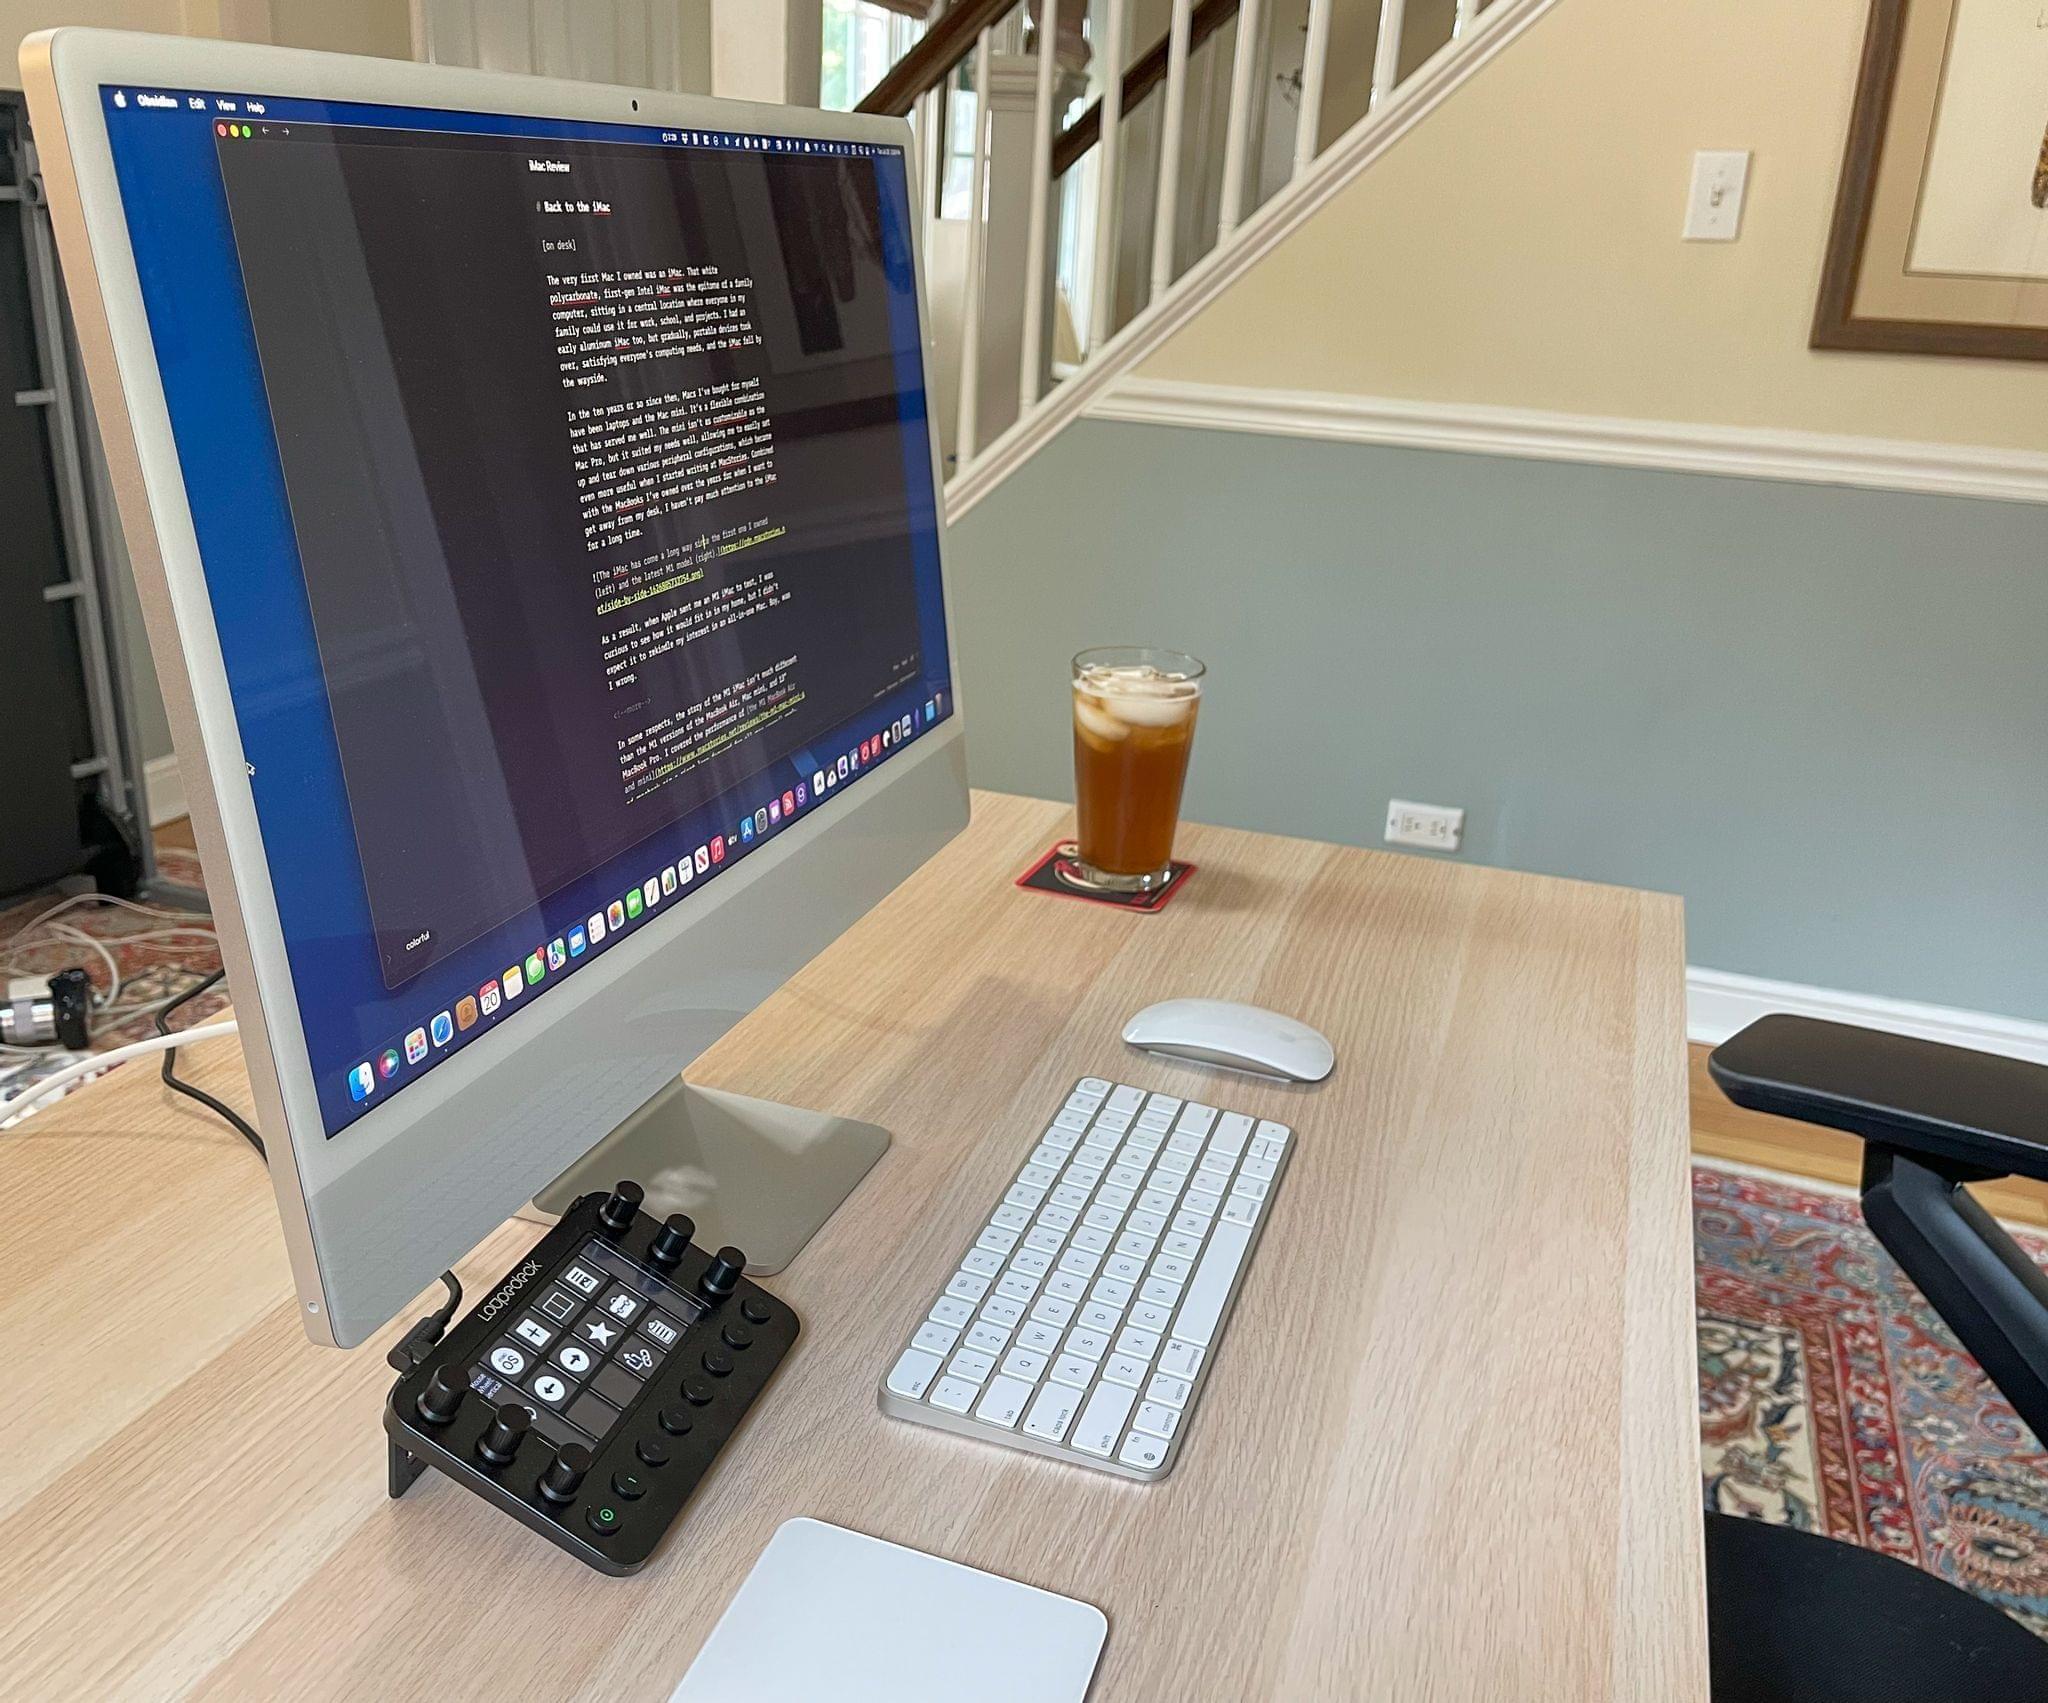 I've spent over 1,000 hours working on the M1 iMac using Monterey since June.